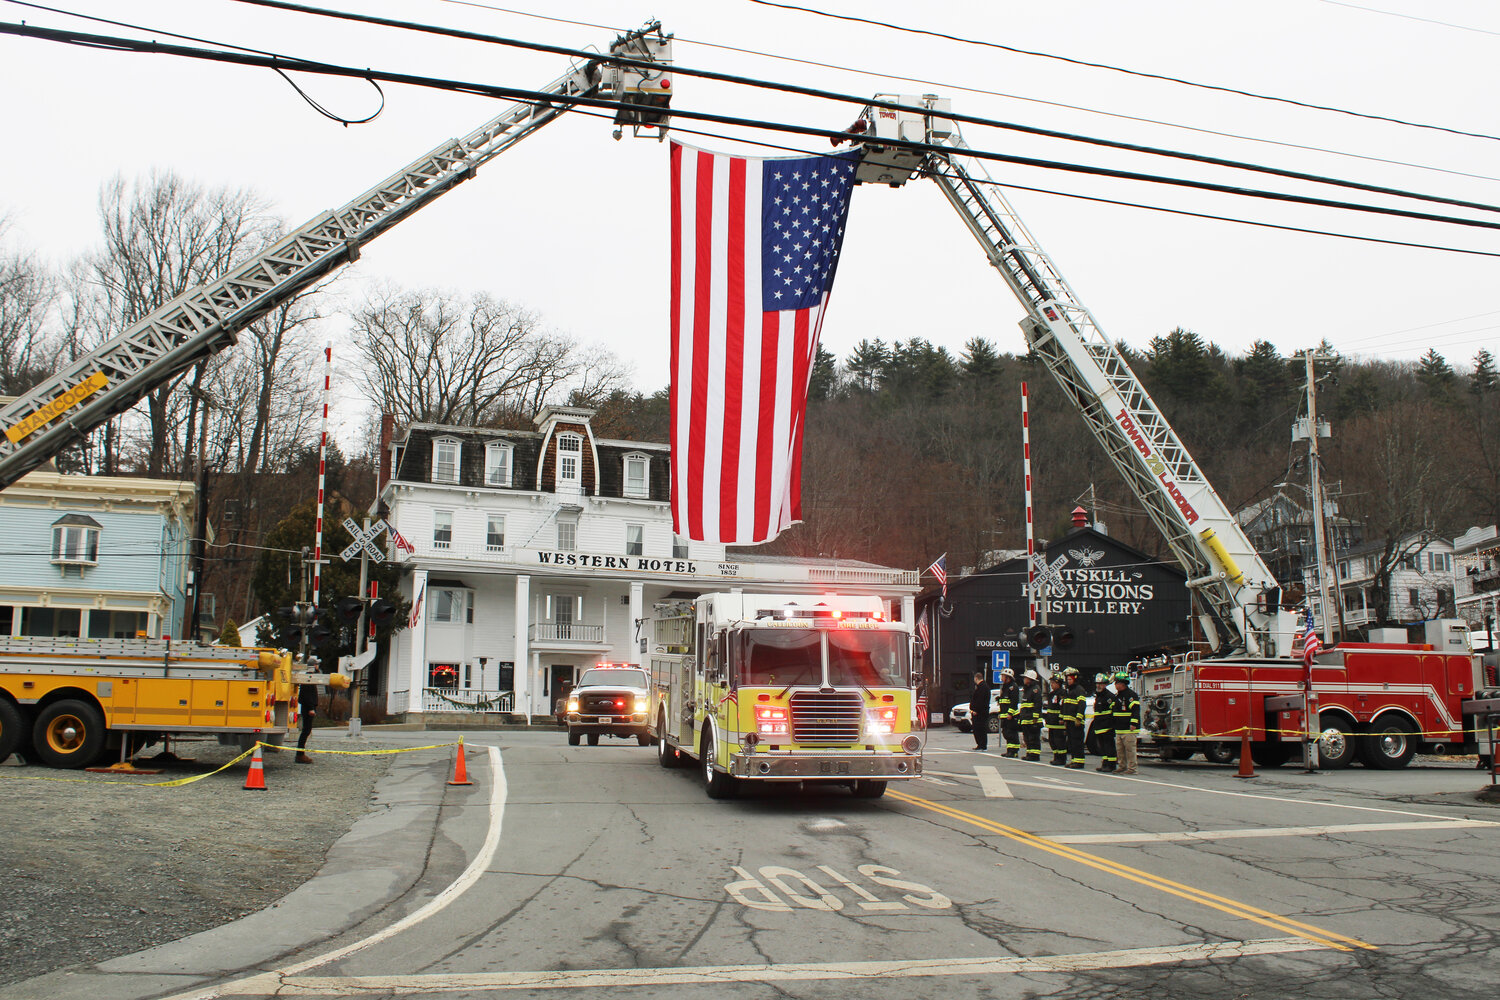 A Callicoon Fire Department truck drove under the U.S. flag held aloft by Roscoe-Rockland and Hancock Fire Departments. through Lower Main Street.